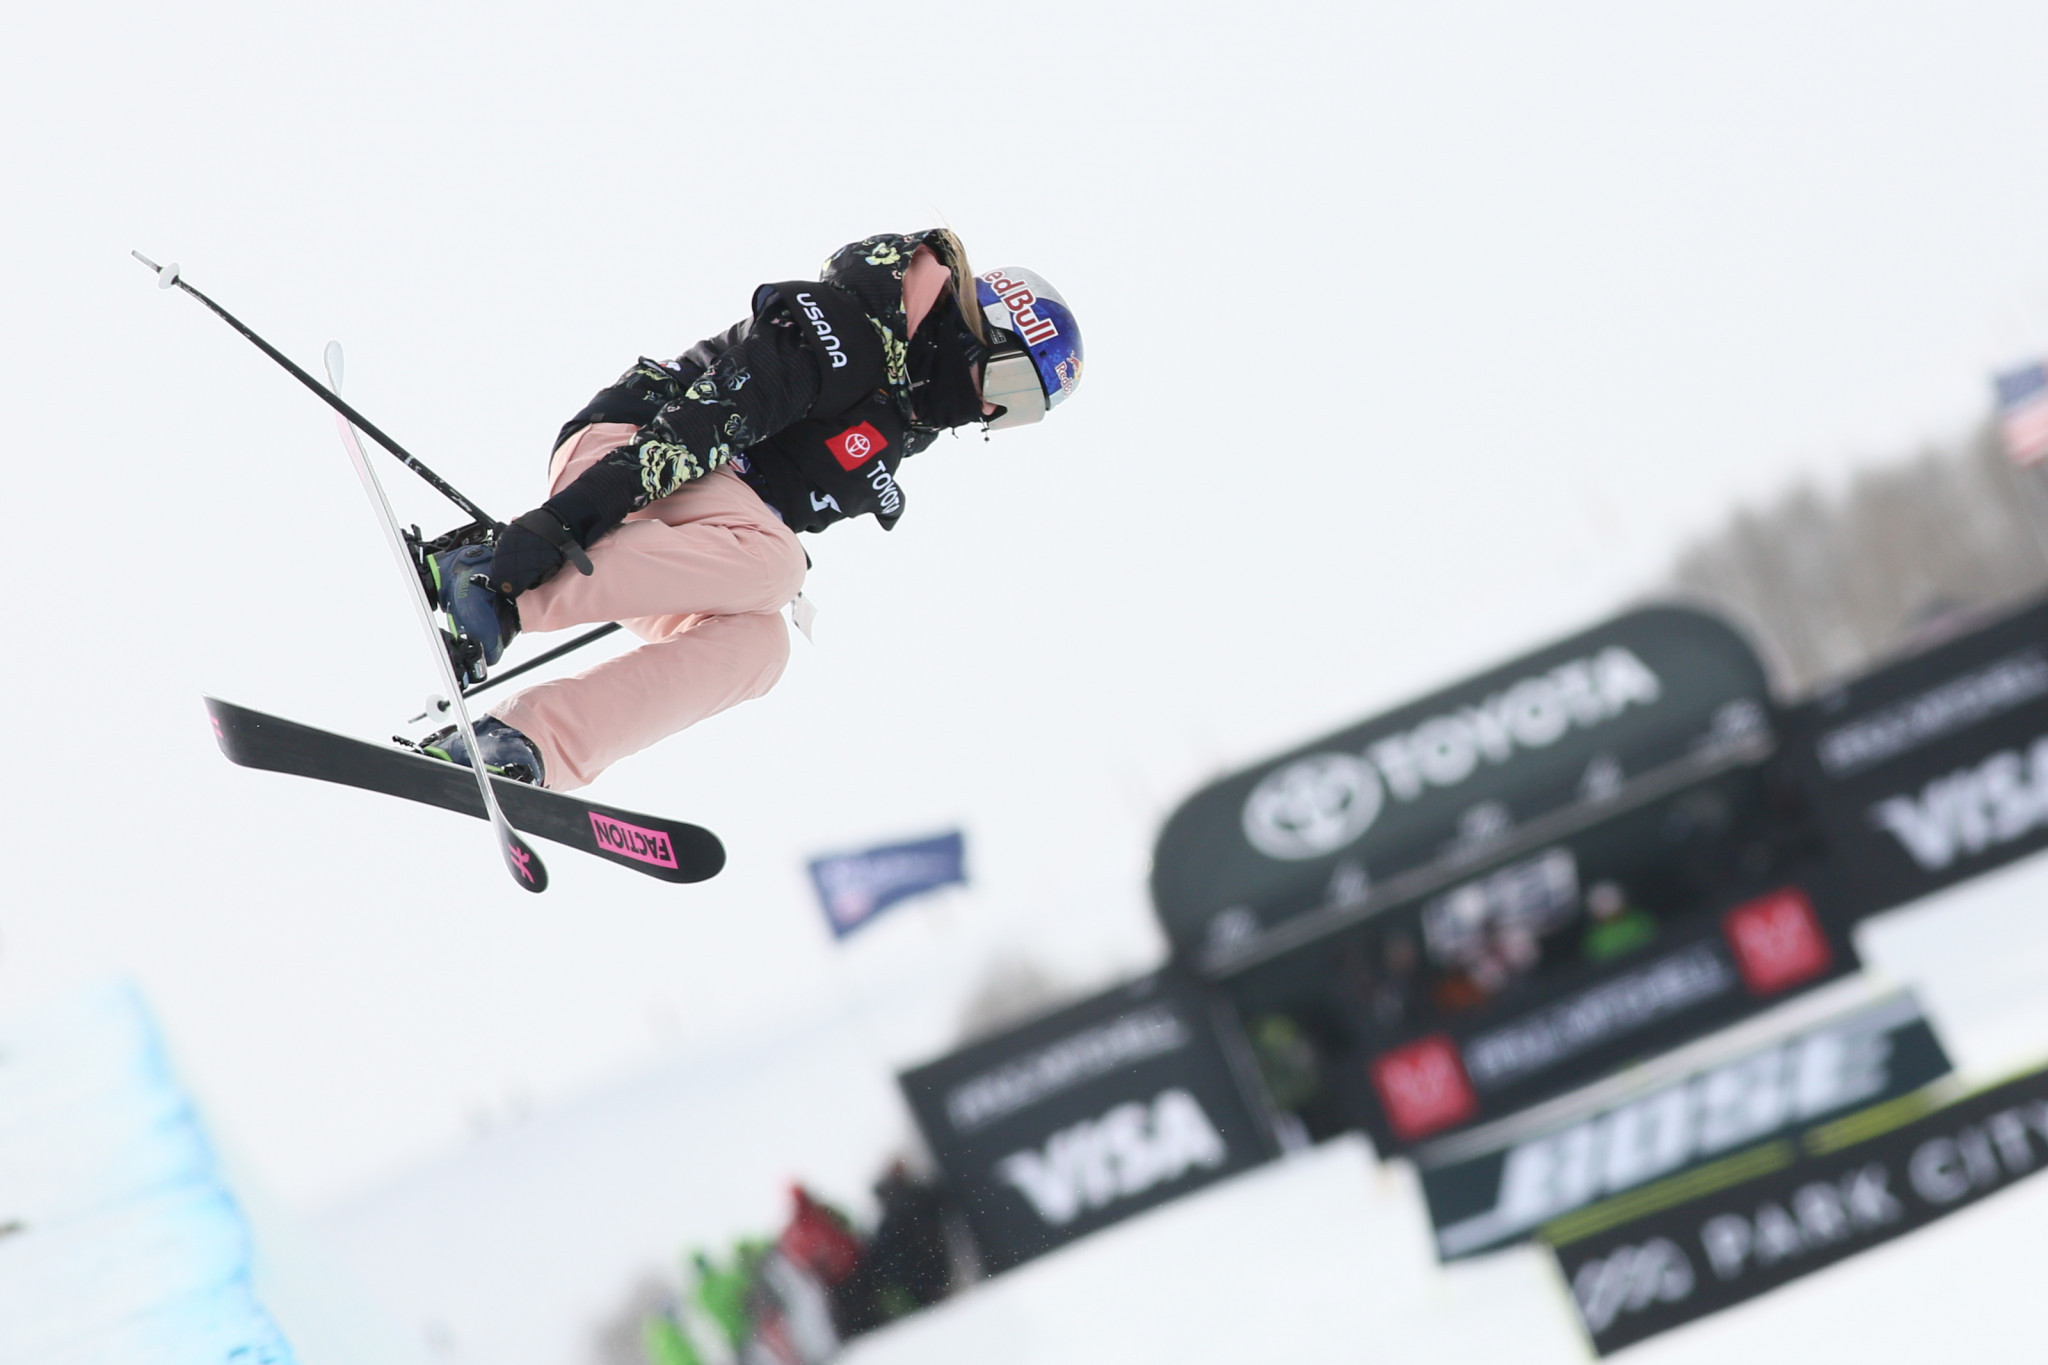 Estonia's Kelly Sildaru was crowned women's slopestyle champion at the FIS World Junior Freestyle Skiing Championships in Klaeppen ©Getty Images